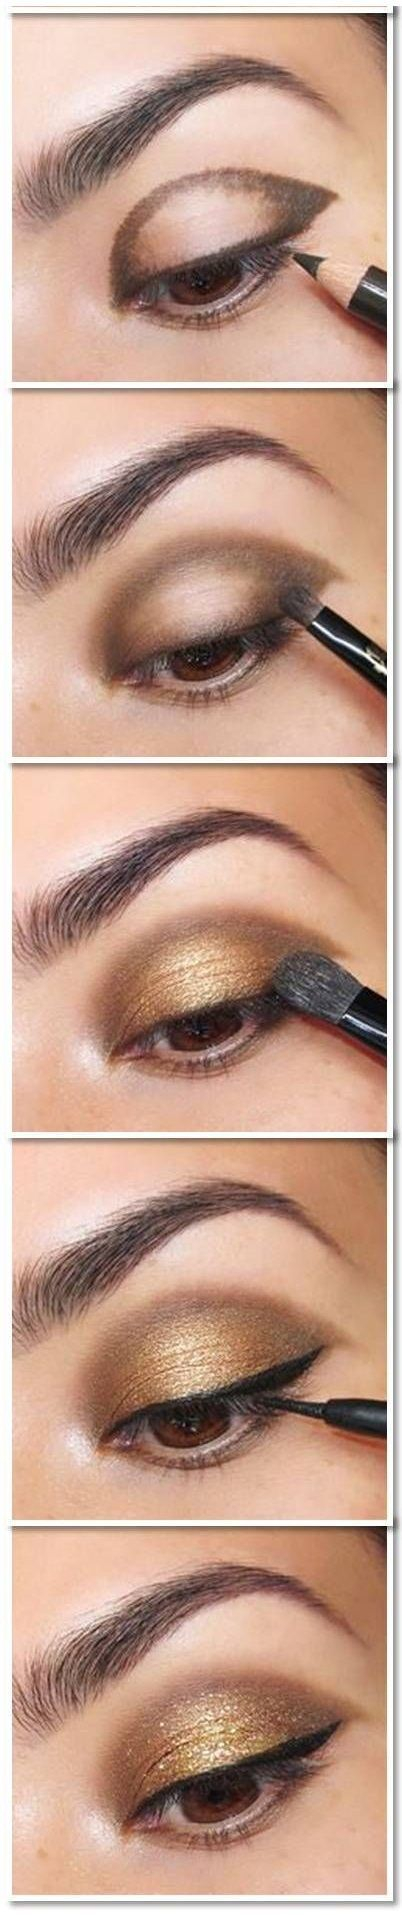 Makeup For Brown Eyes Tutorial 10 Gold Smoky Eye Tutorials For Fall Pretty Designs